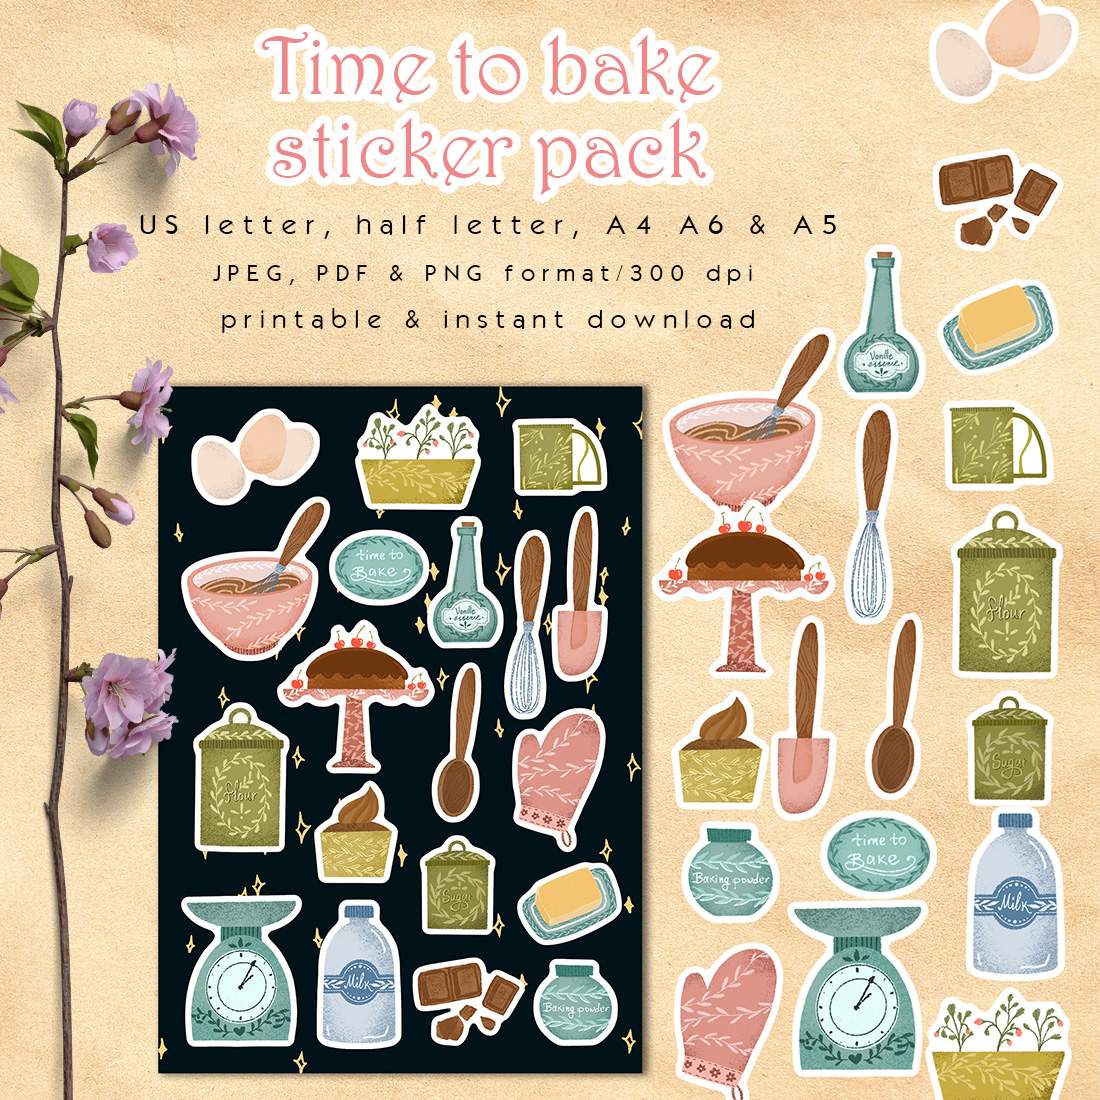 Home bake sticker pack cover image.